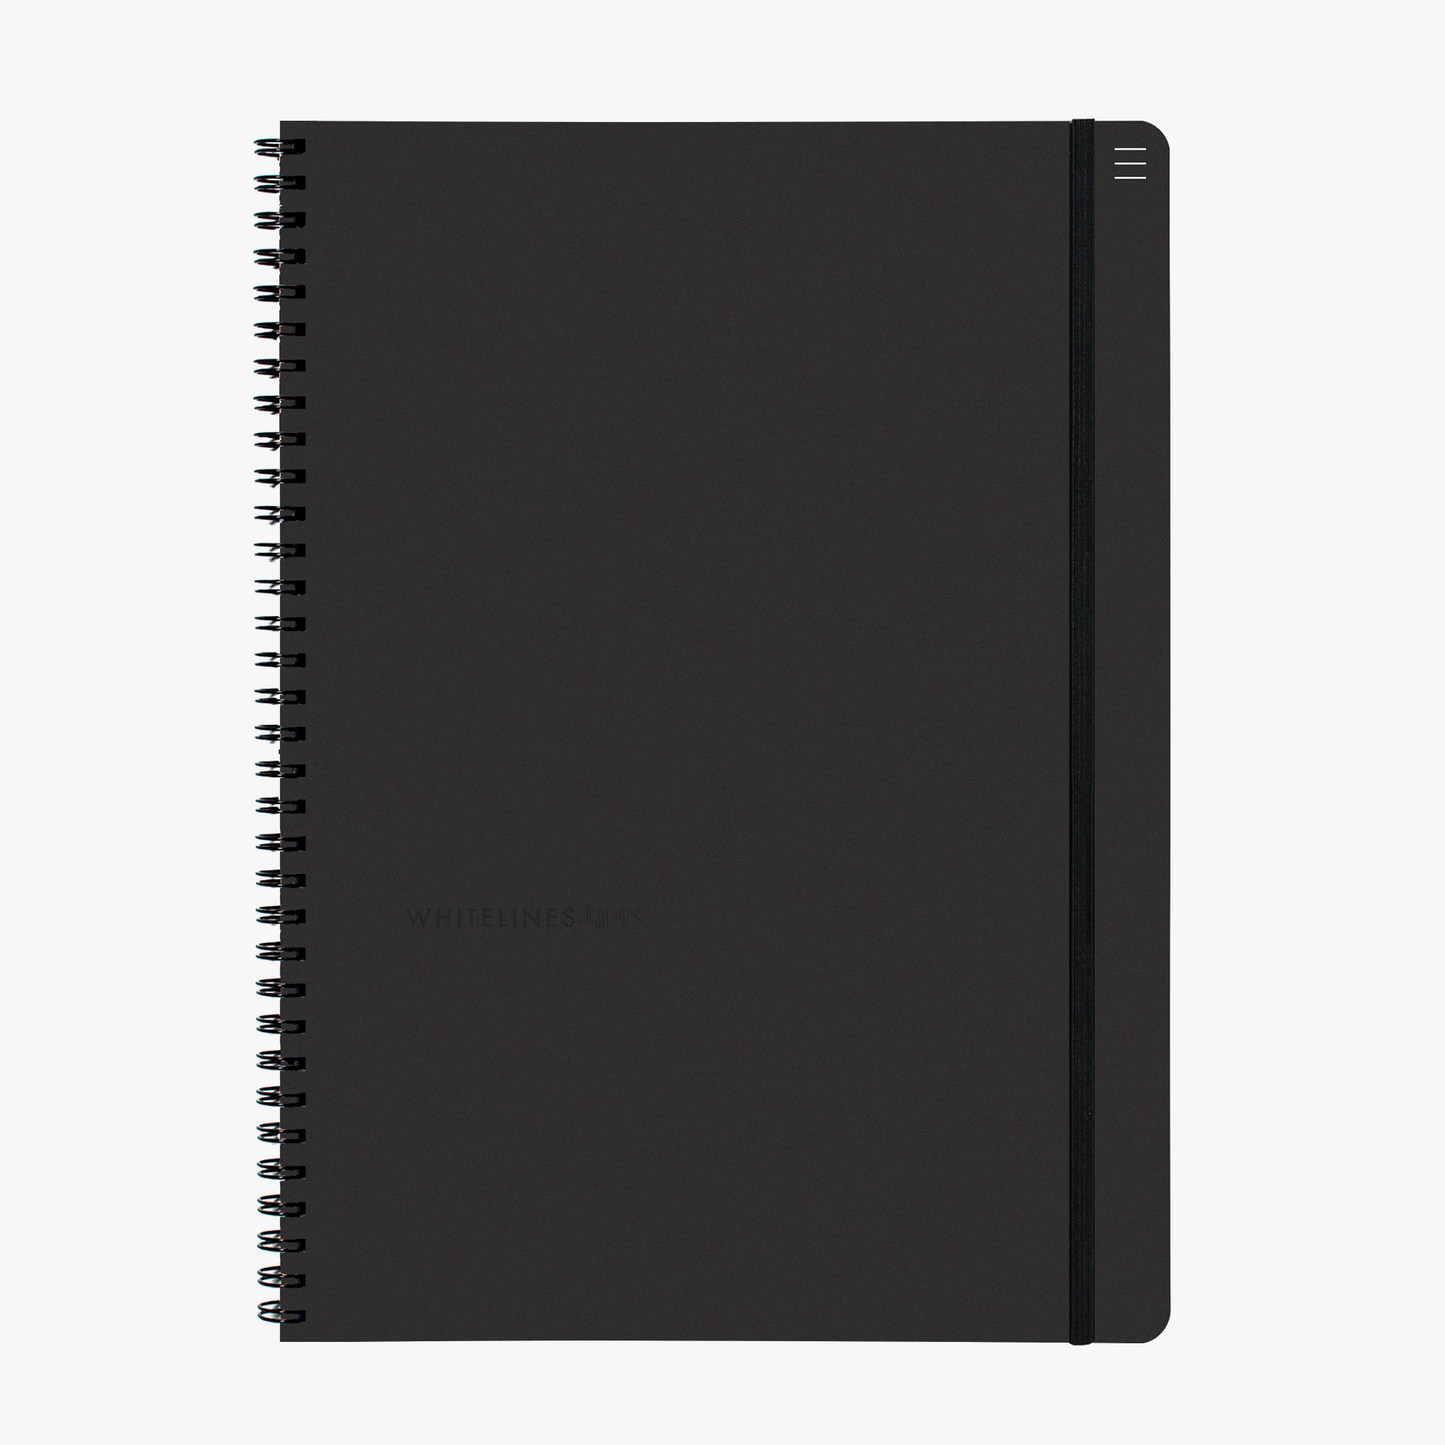 Black lined A4 notebook with white lines